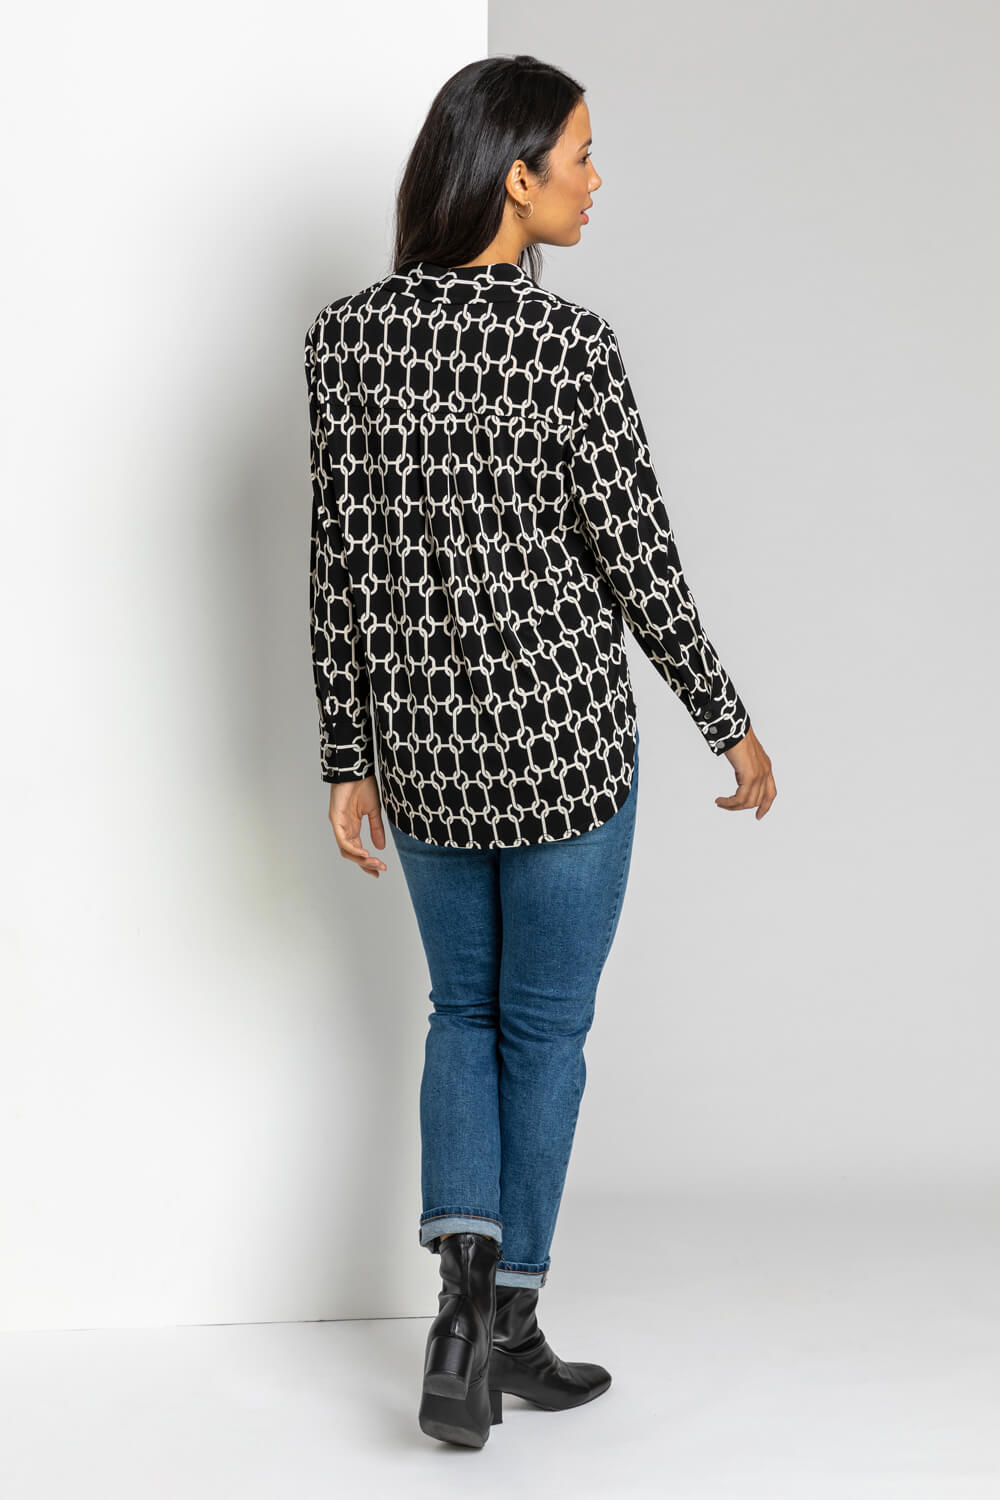 Black Chain Print Long Sleeve Collared Jersey Blouse, Image 2 of 5